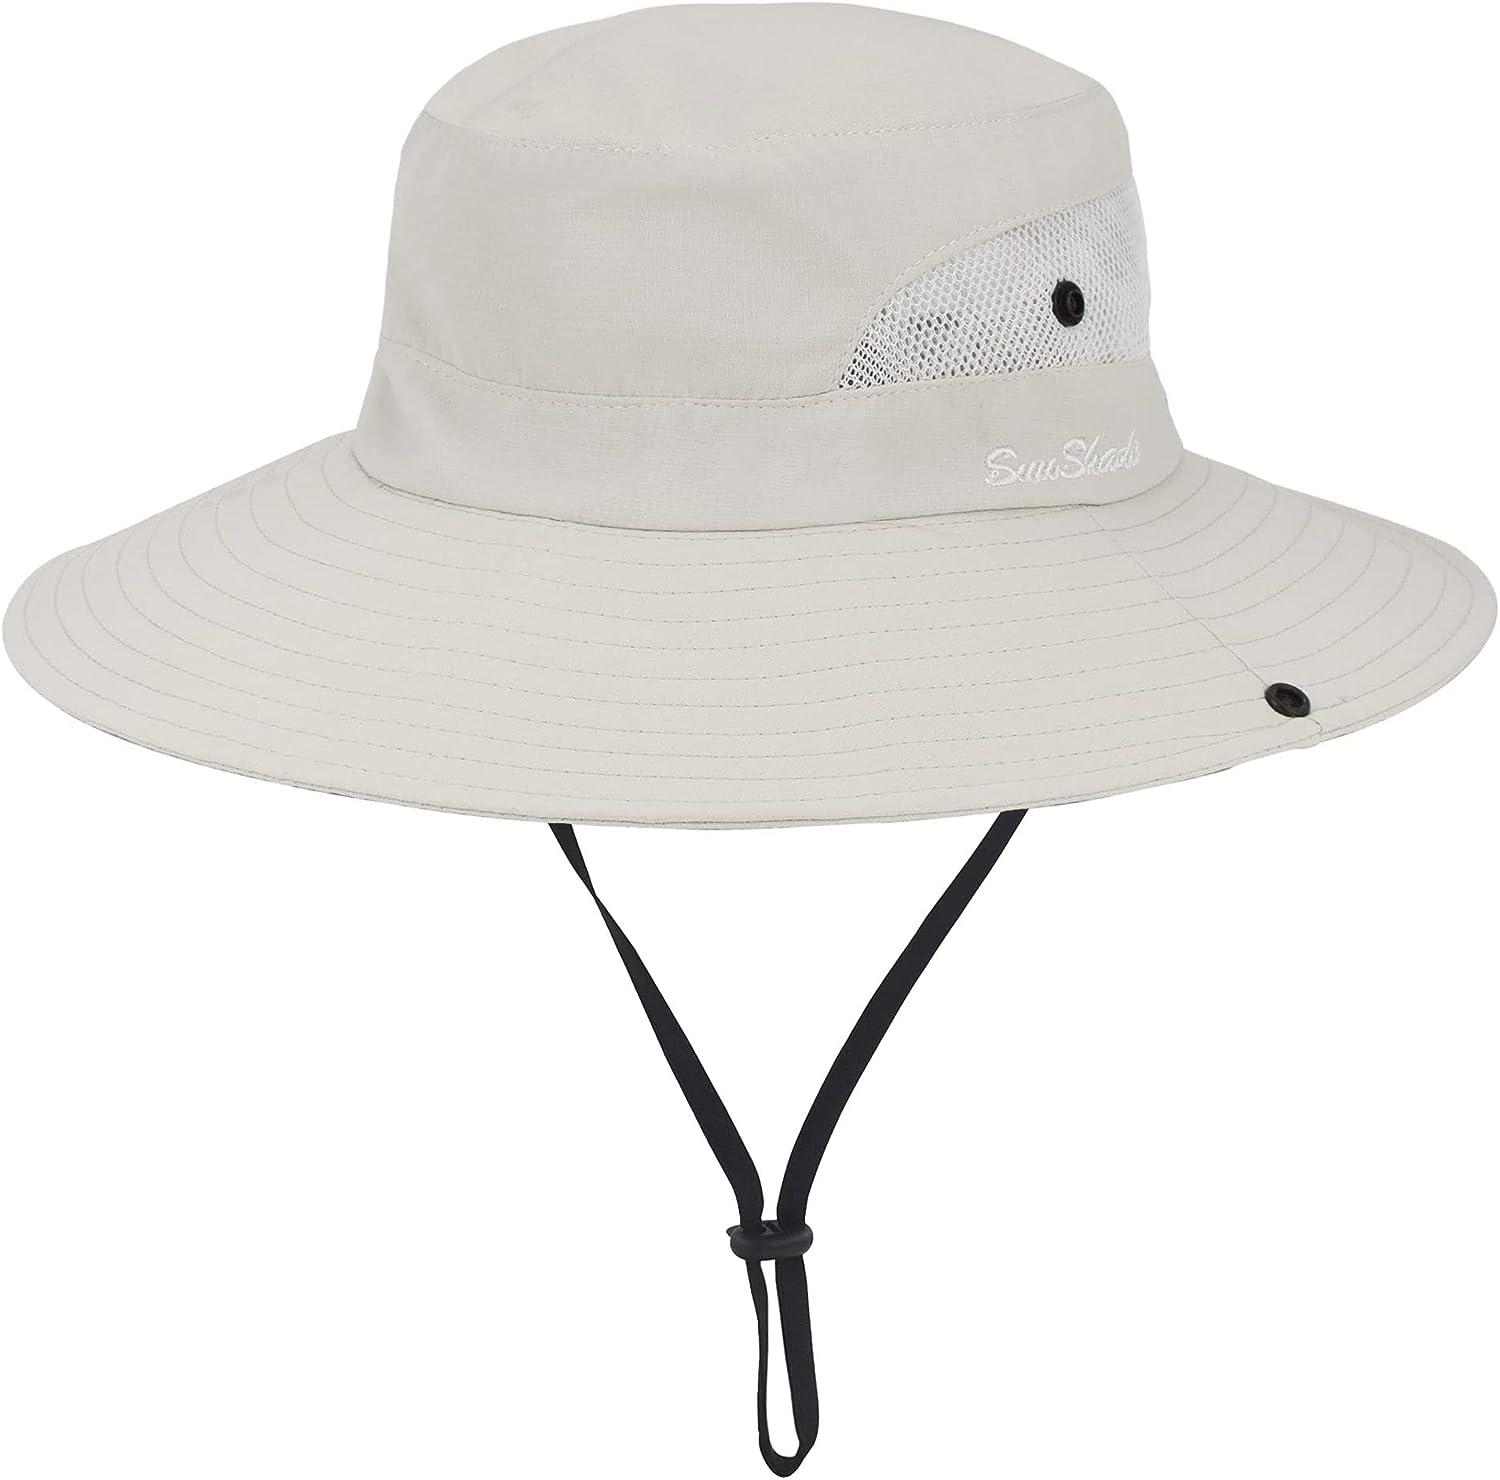 Yuanbang Womens Sun Hat UPF 50+ Wide Brim and Ponytail Hole,F,, adult Unisex, Size: One size, Beige